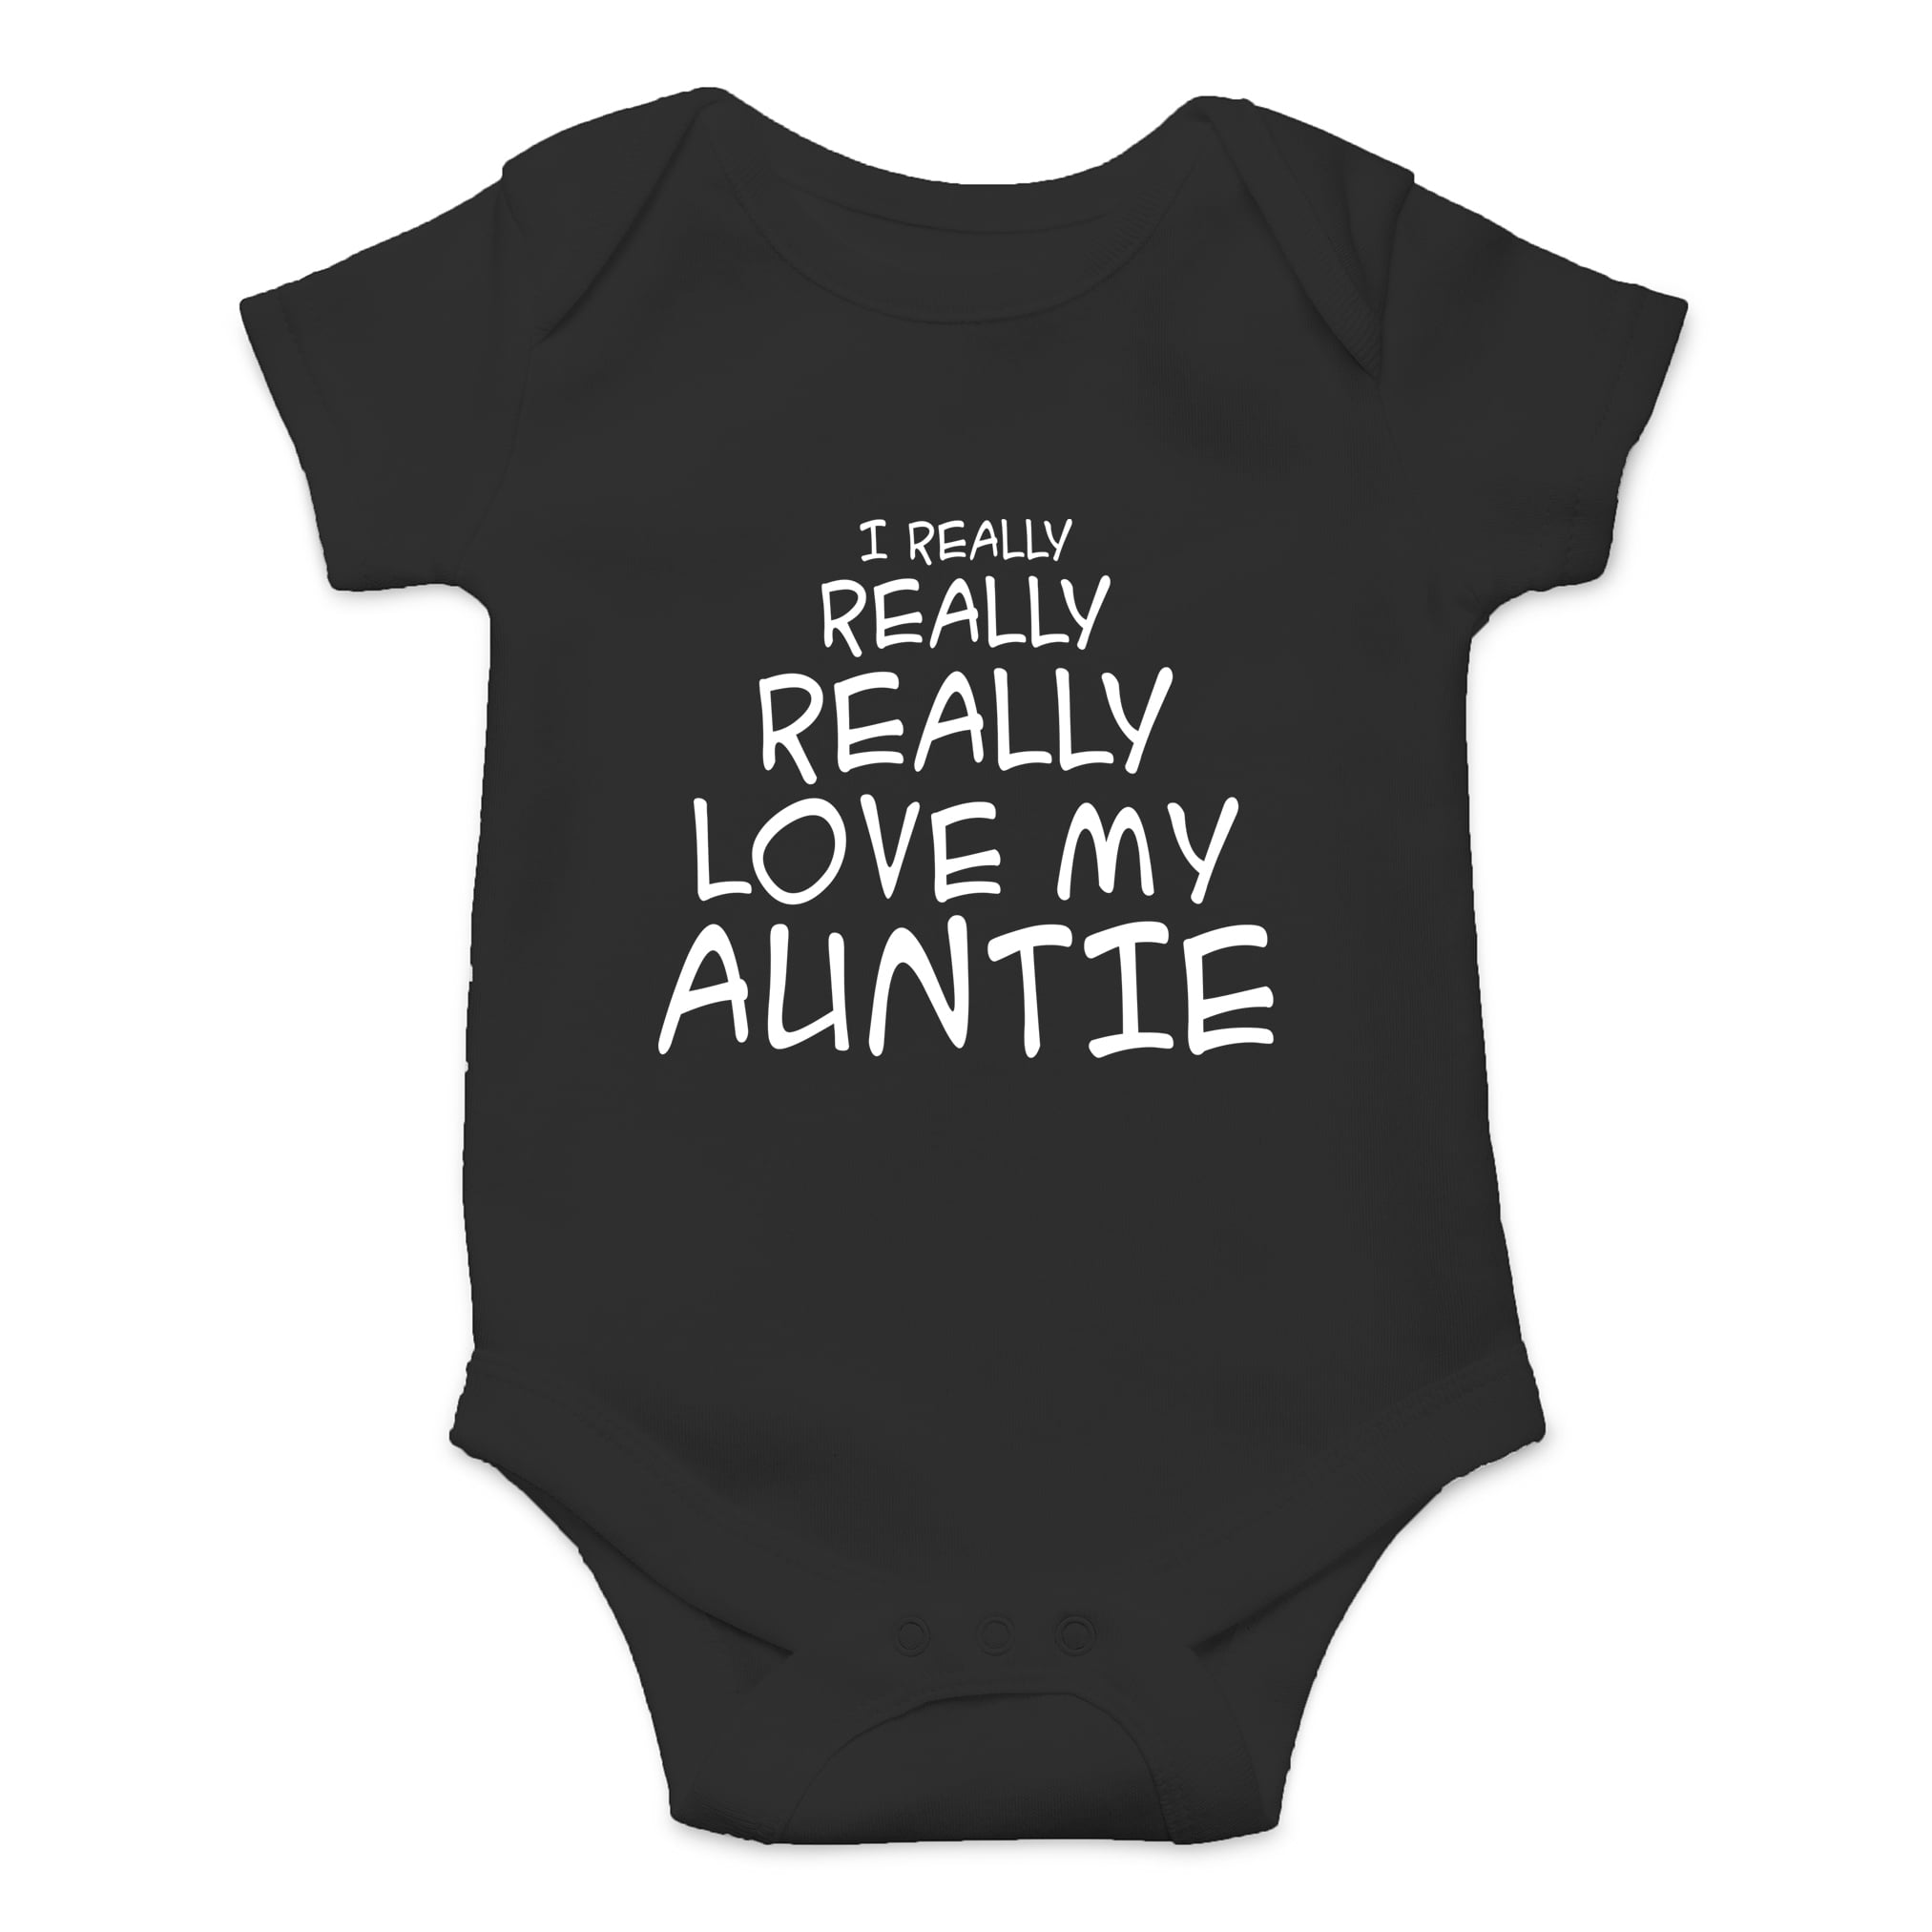 My Aunt Feels Guilty Baby Bodysuit One Piece Romper or Toddler T-Shirt Gift from 